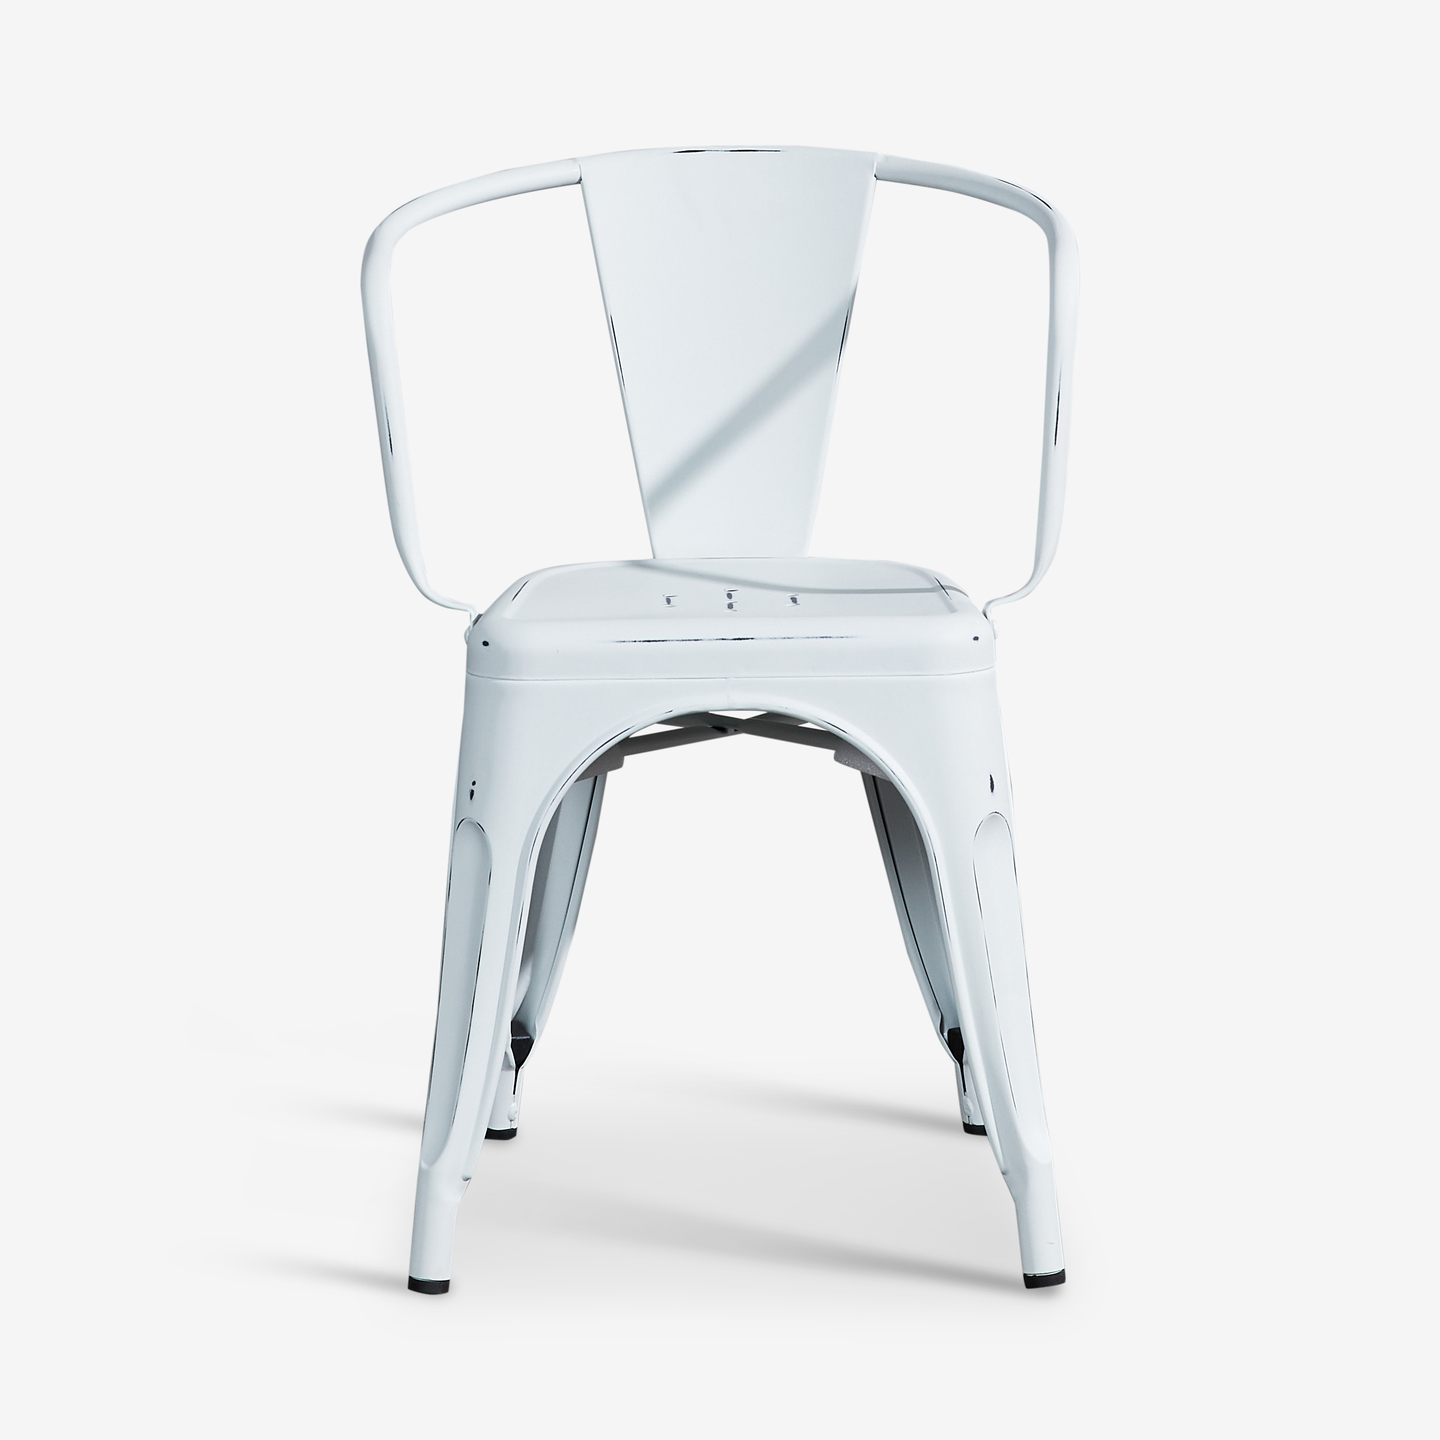 199_Trattoria-Arm-Chair-Distressed-White_Flat-Front 2020